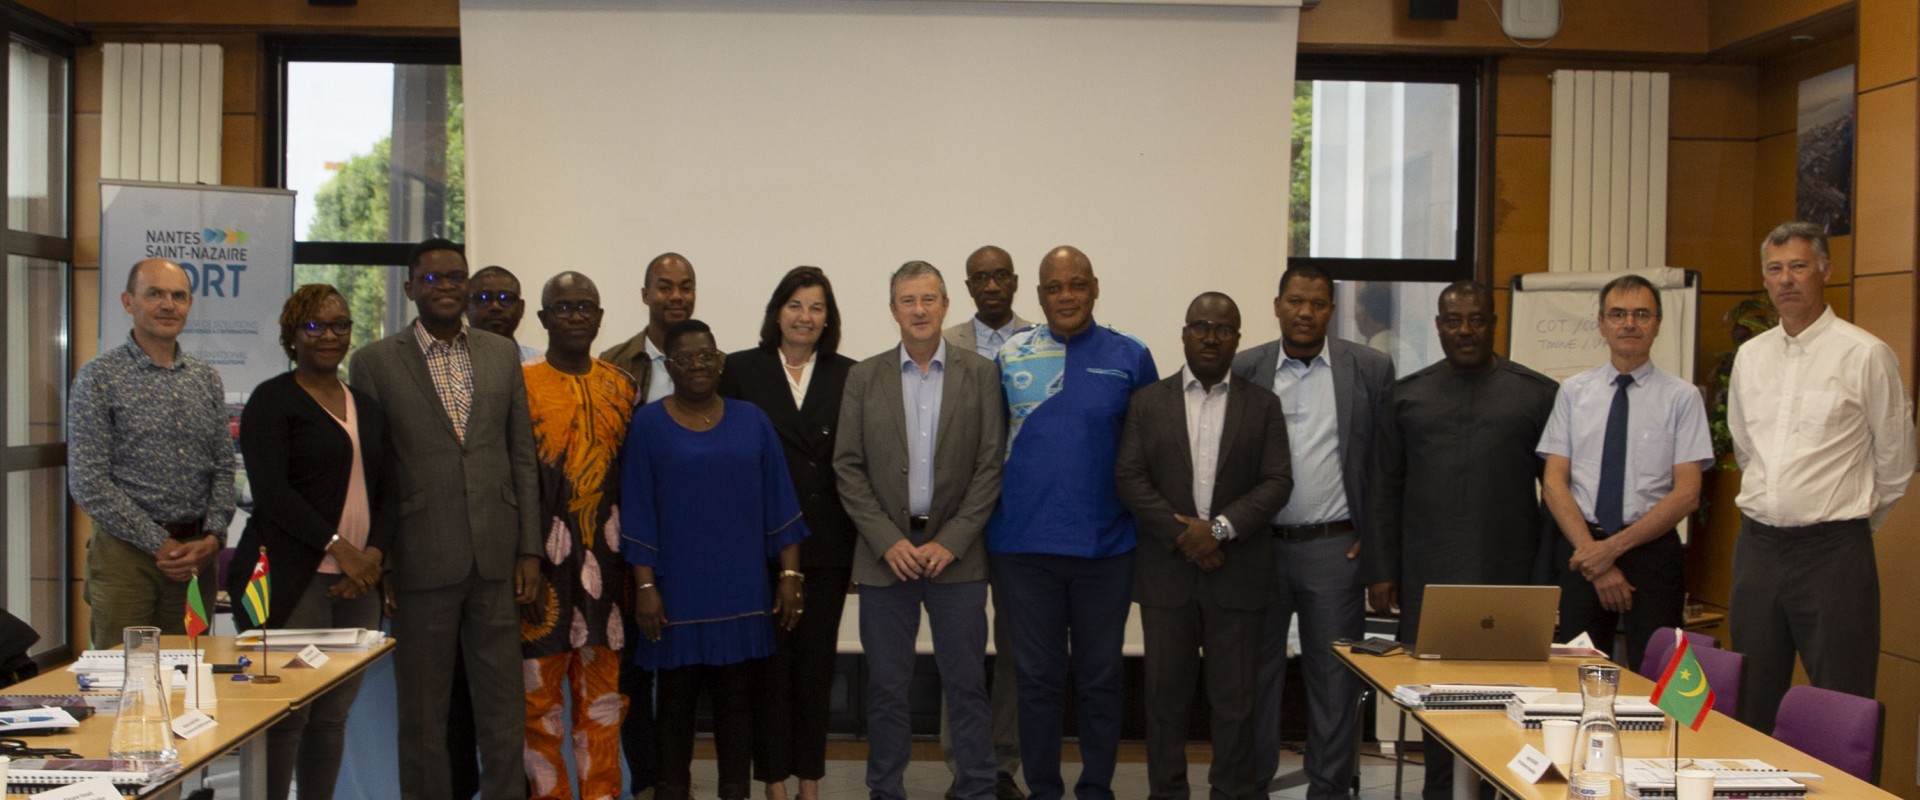 Port Managers from Africa Receive Training at Nantes ‒ Saint Nazaire Port